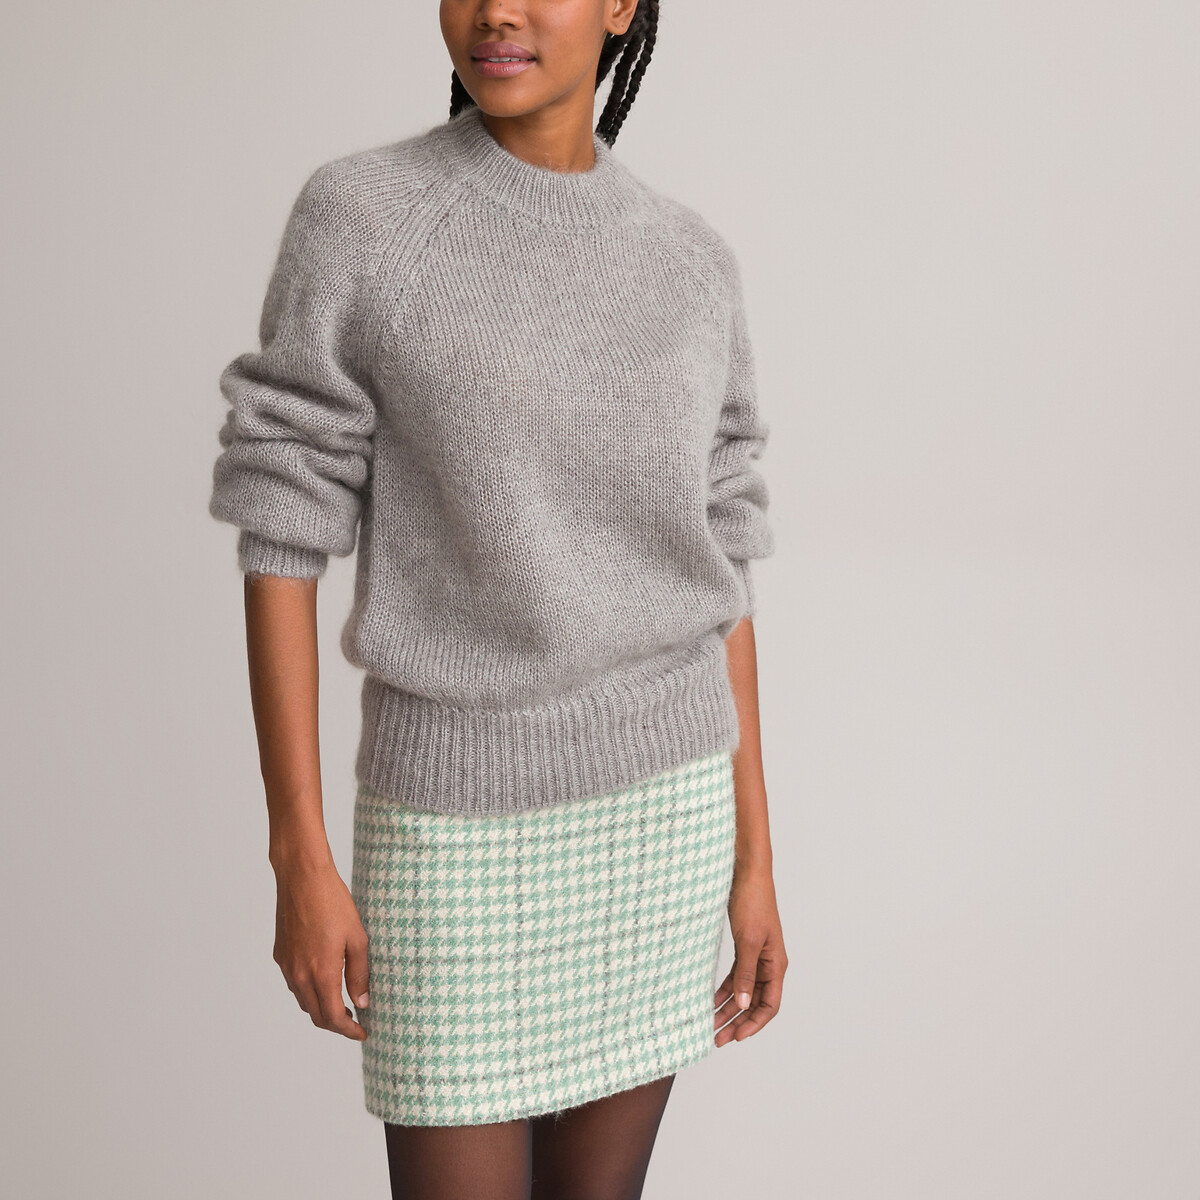 Mohair Mix Jumper with Crew Neck La Redoute 